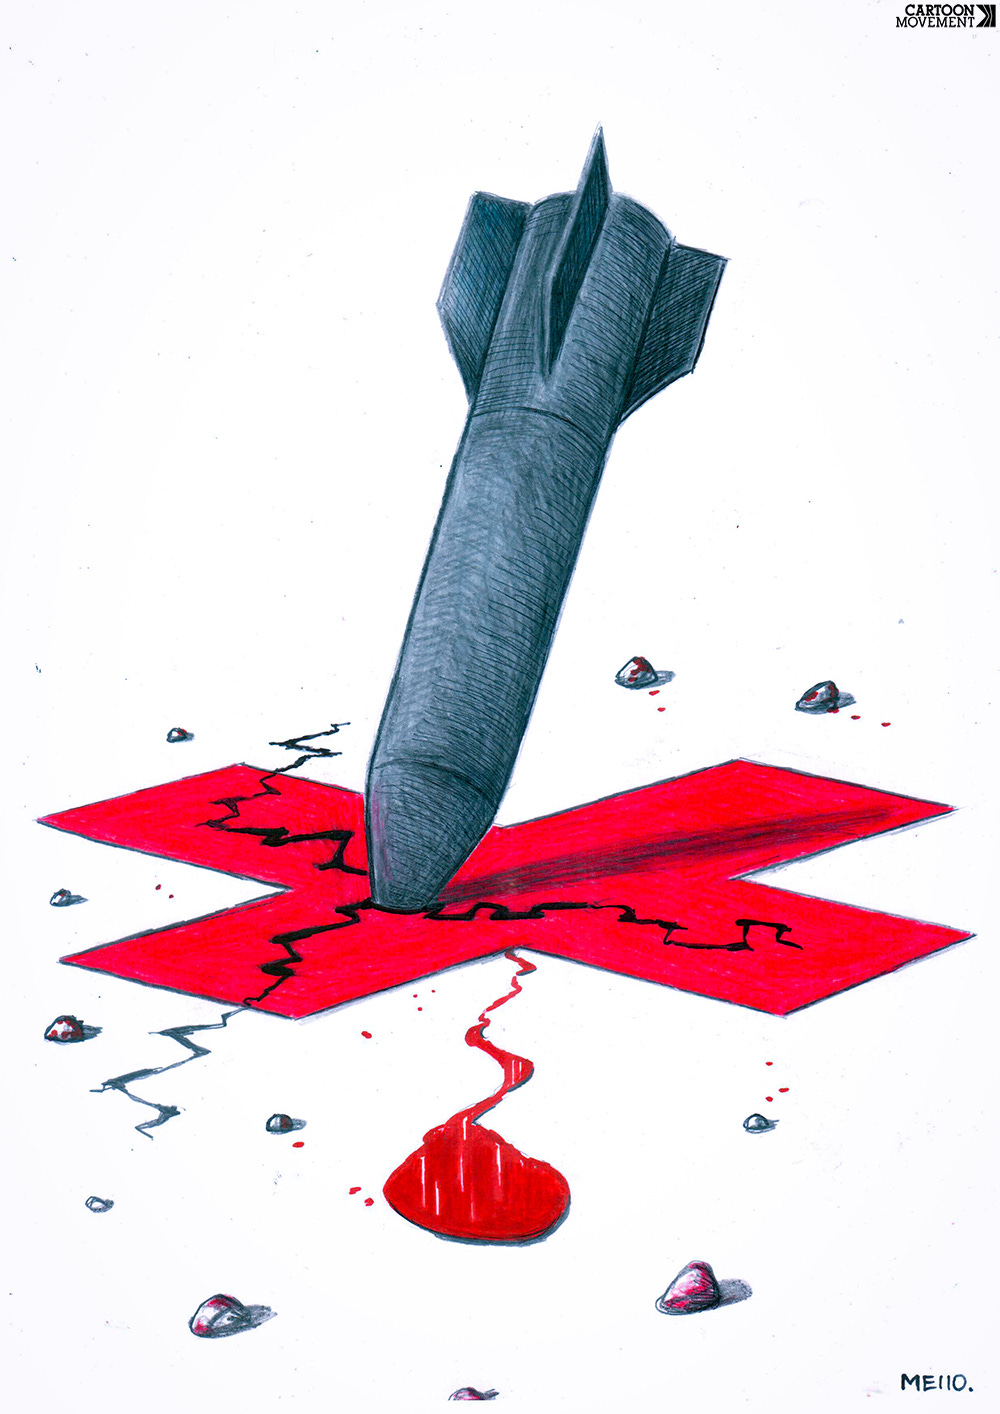 Cartoon showing a missile stuck in a Red Cross that is painted as a target on the ground. From the cracks in the ground where the missile has struck, a drop of blood emerges.